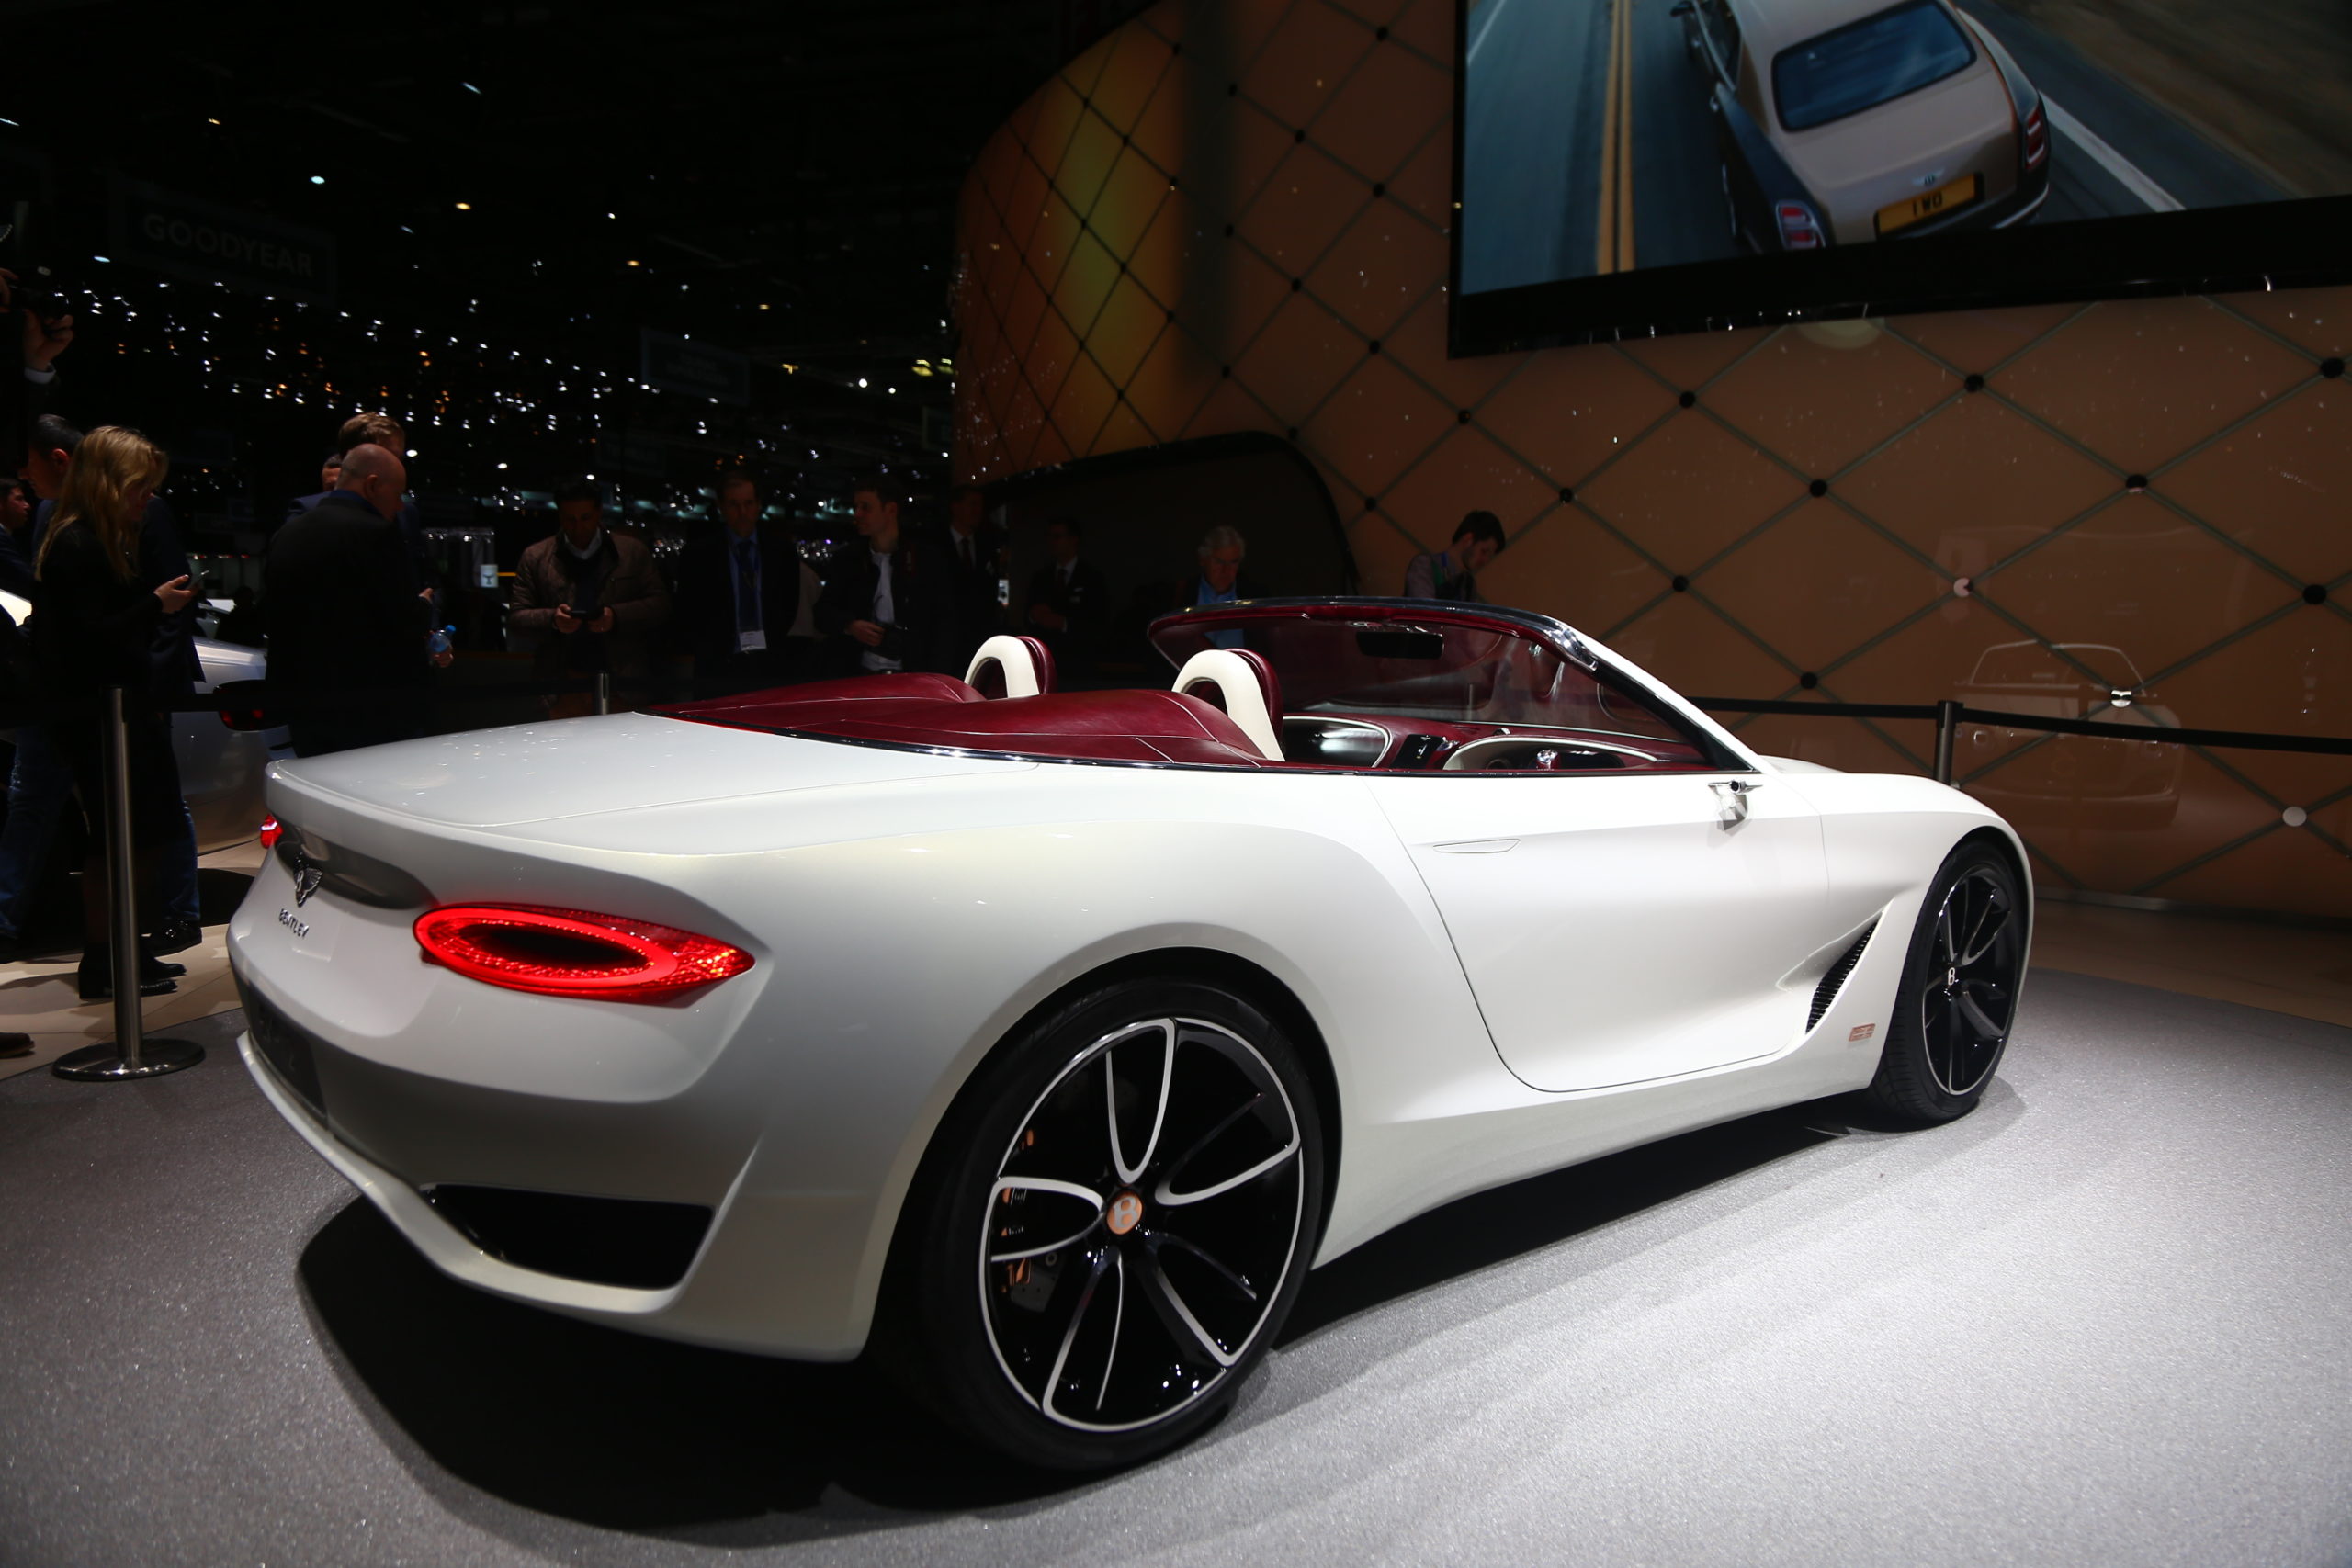 If Bentley’s Electric Future Looks Like This I’m In